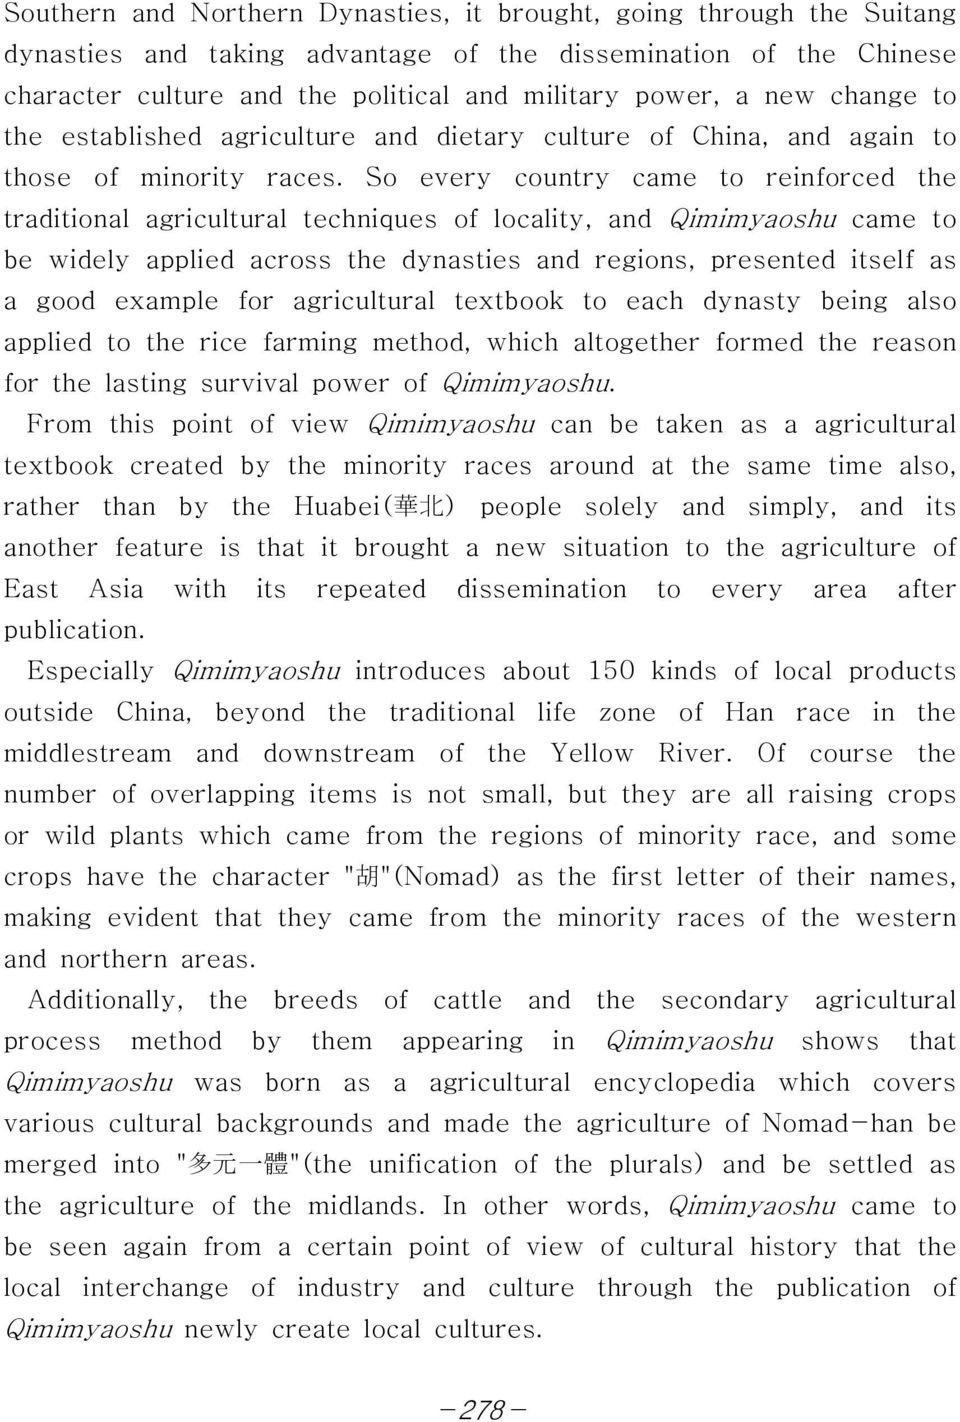 So every country came to reinforced the traditional agricultural techniques of locality, and Qimimyaoshu came to be widely applied across the dynasties and regions, presented itself as a good example